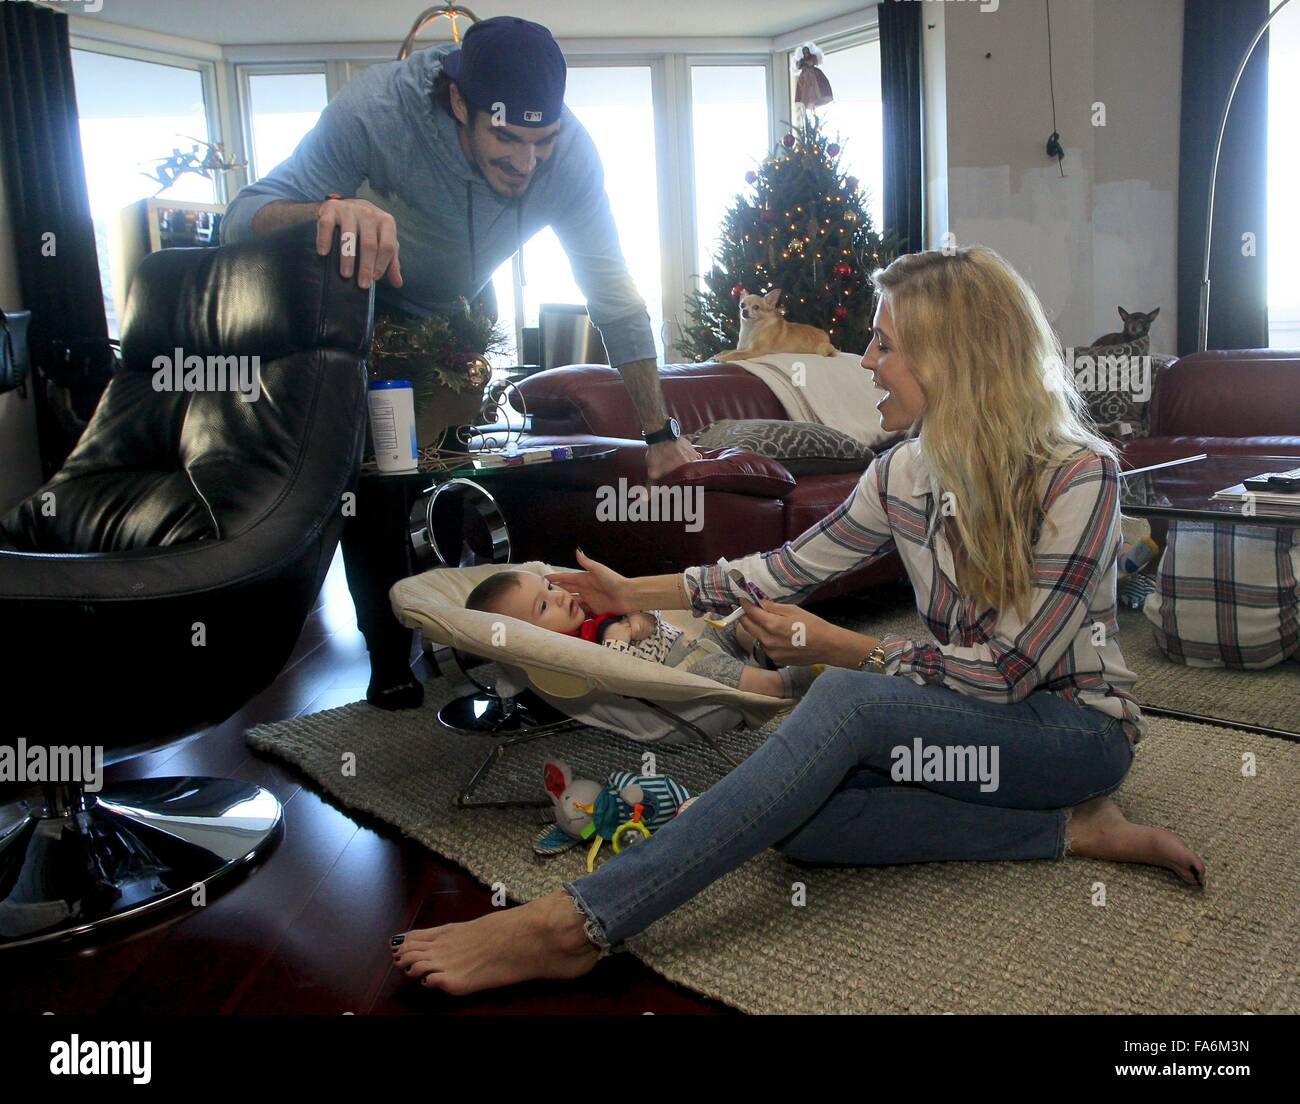 Tampa, Florida, USA. 19th Dec, 2015. DIRK SHADD | Times .Tampa Bay Lightning forward Brian Boyle with wife his wife Lauren, both 31, as she feeds their baby Declan, 7 months old, at their home in the Channelside neighborhood of Tampa on Saturday (12/19/15). Also present on the couch are their two pet Chihuahuas, Phoenix and Kingsly. The couple had Declan, their first child, in the middle of the Lightning playoff run last spring. © Dirk Shadd/Tampa Bay Times/ZUMA Wire/Alamy Live News Stock Photo